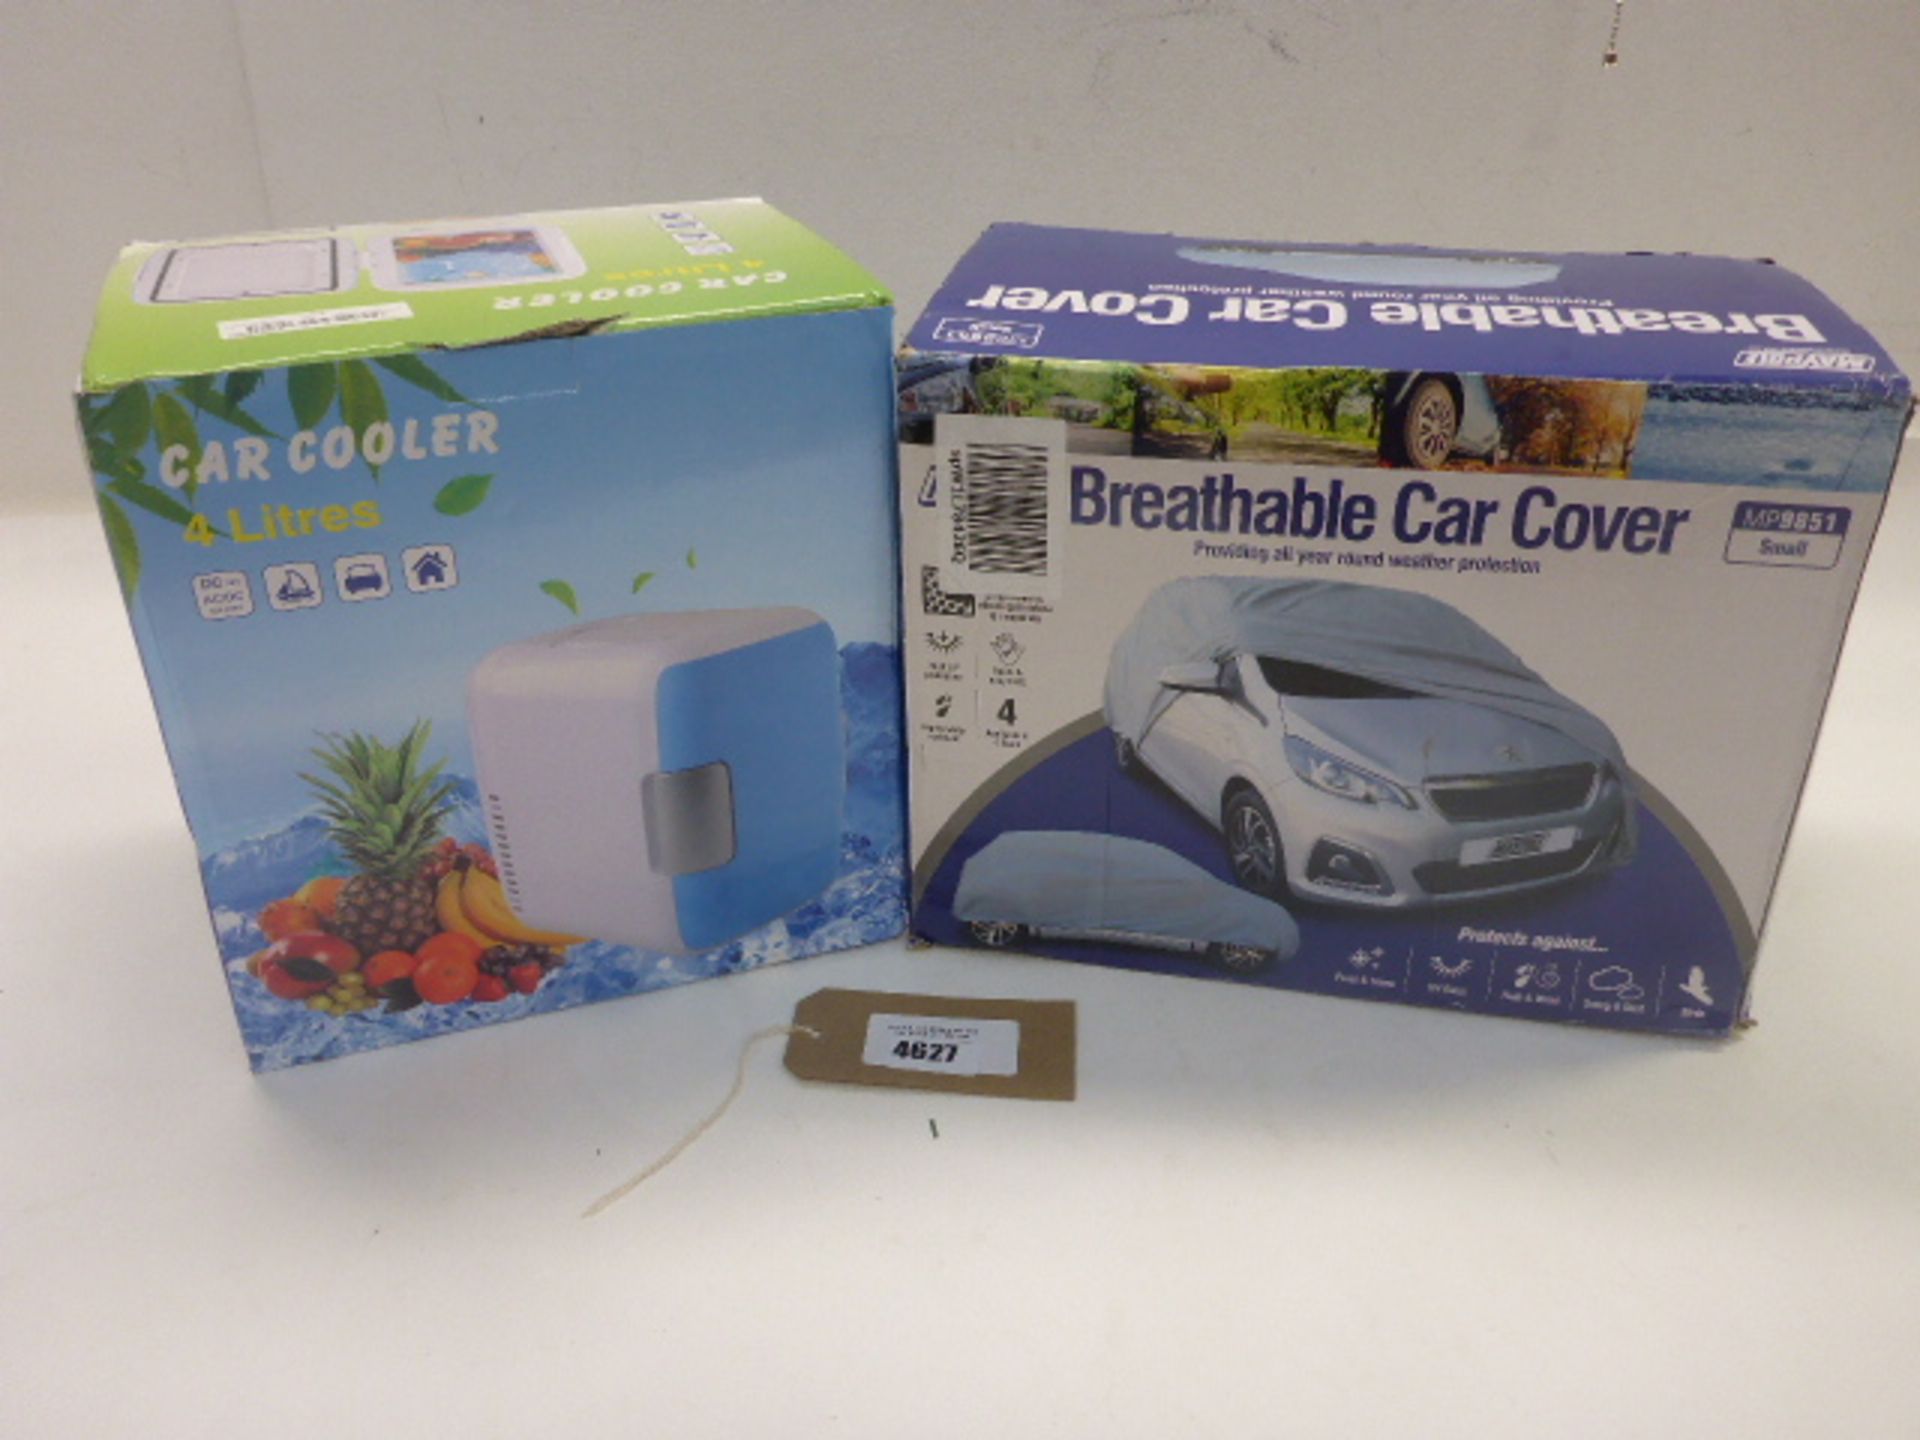 Breathable car cover and 4l car cooler